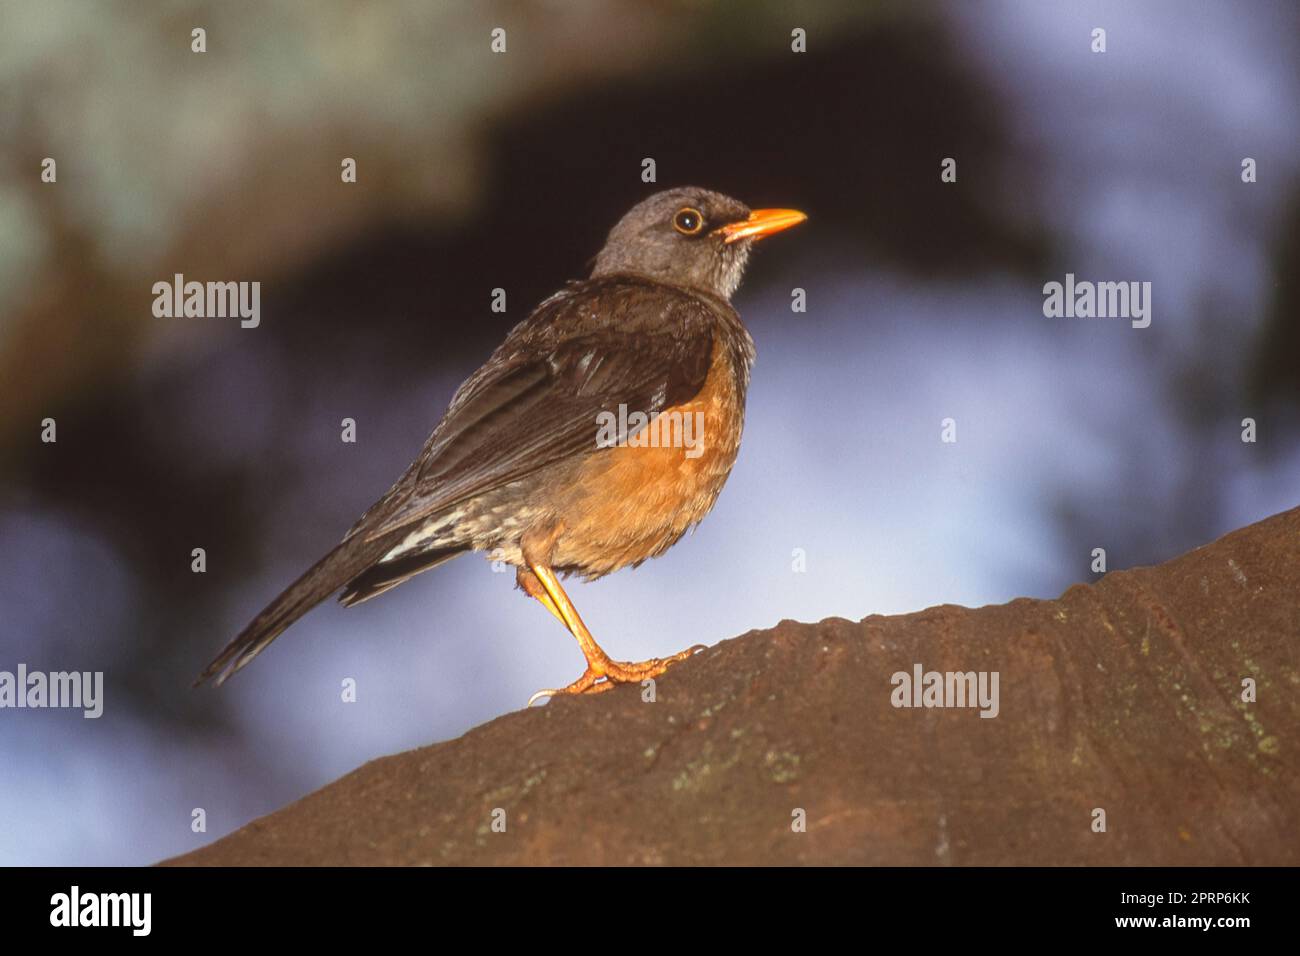 The African thrush or West African thrush (Turdus pelios)  is common in well-wooded areas over much of the western part of sub-Saharan Africa. Stock Photo